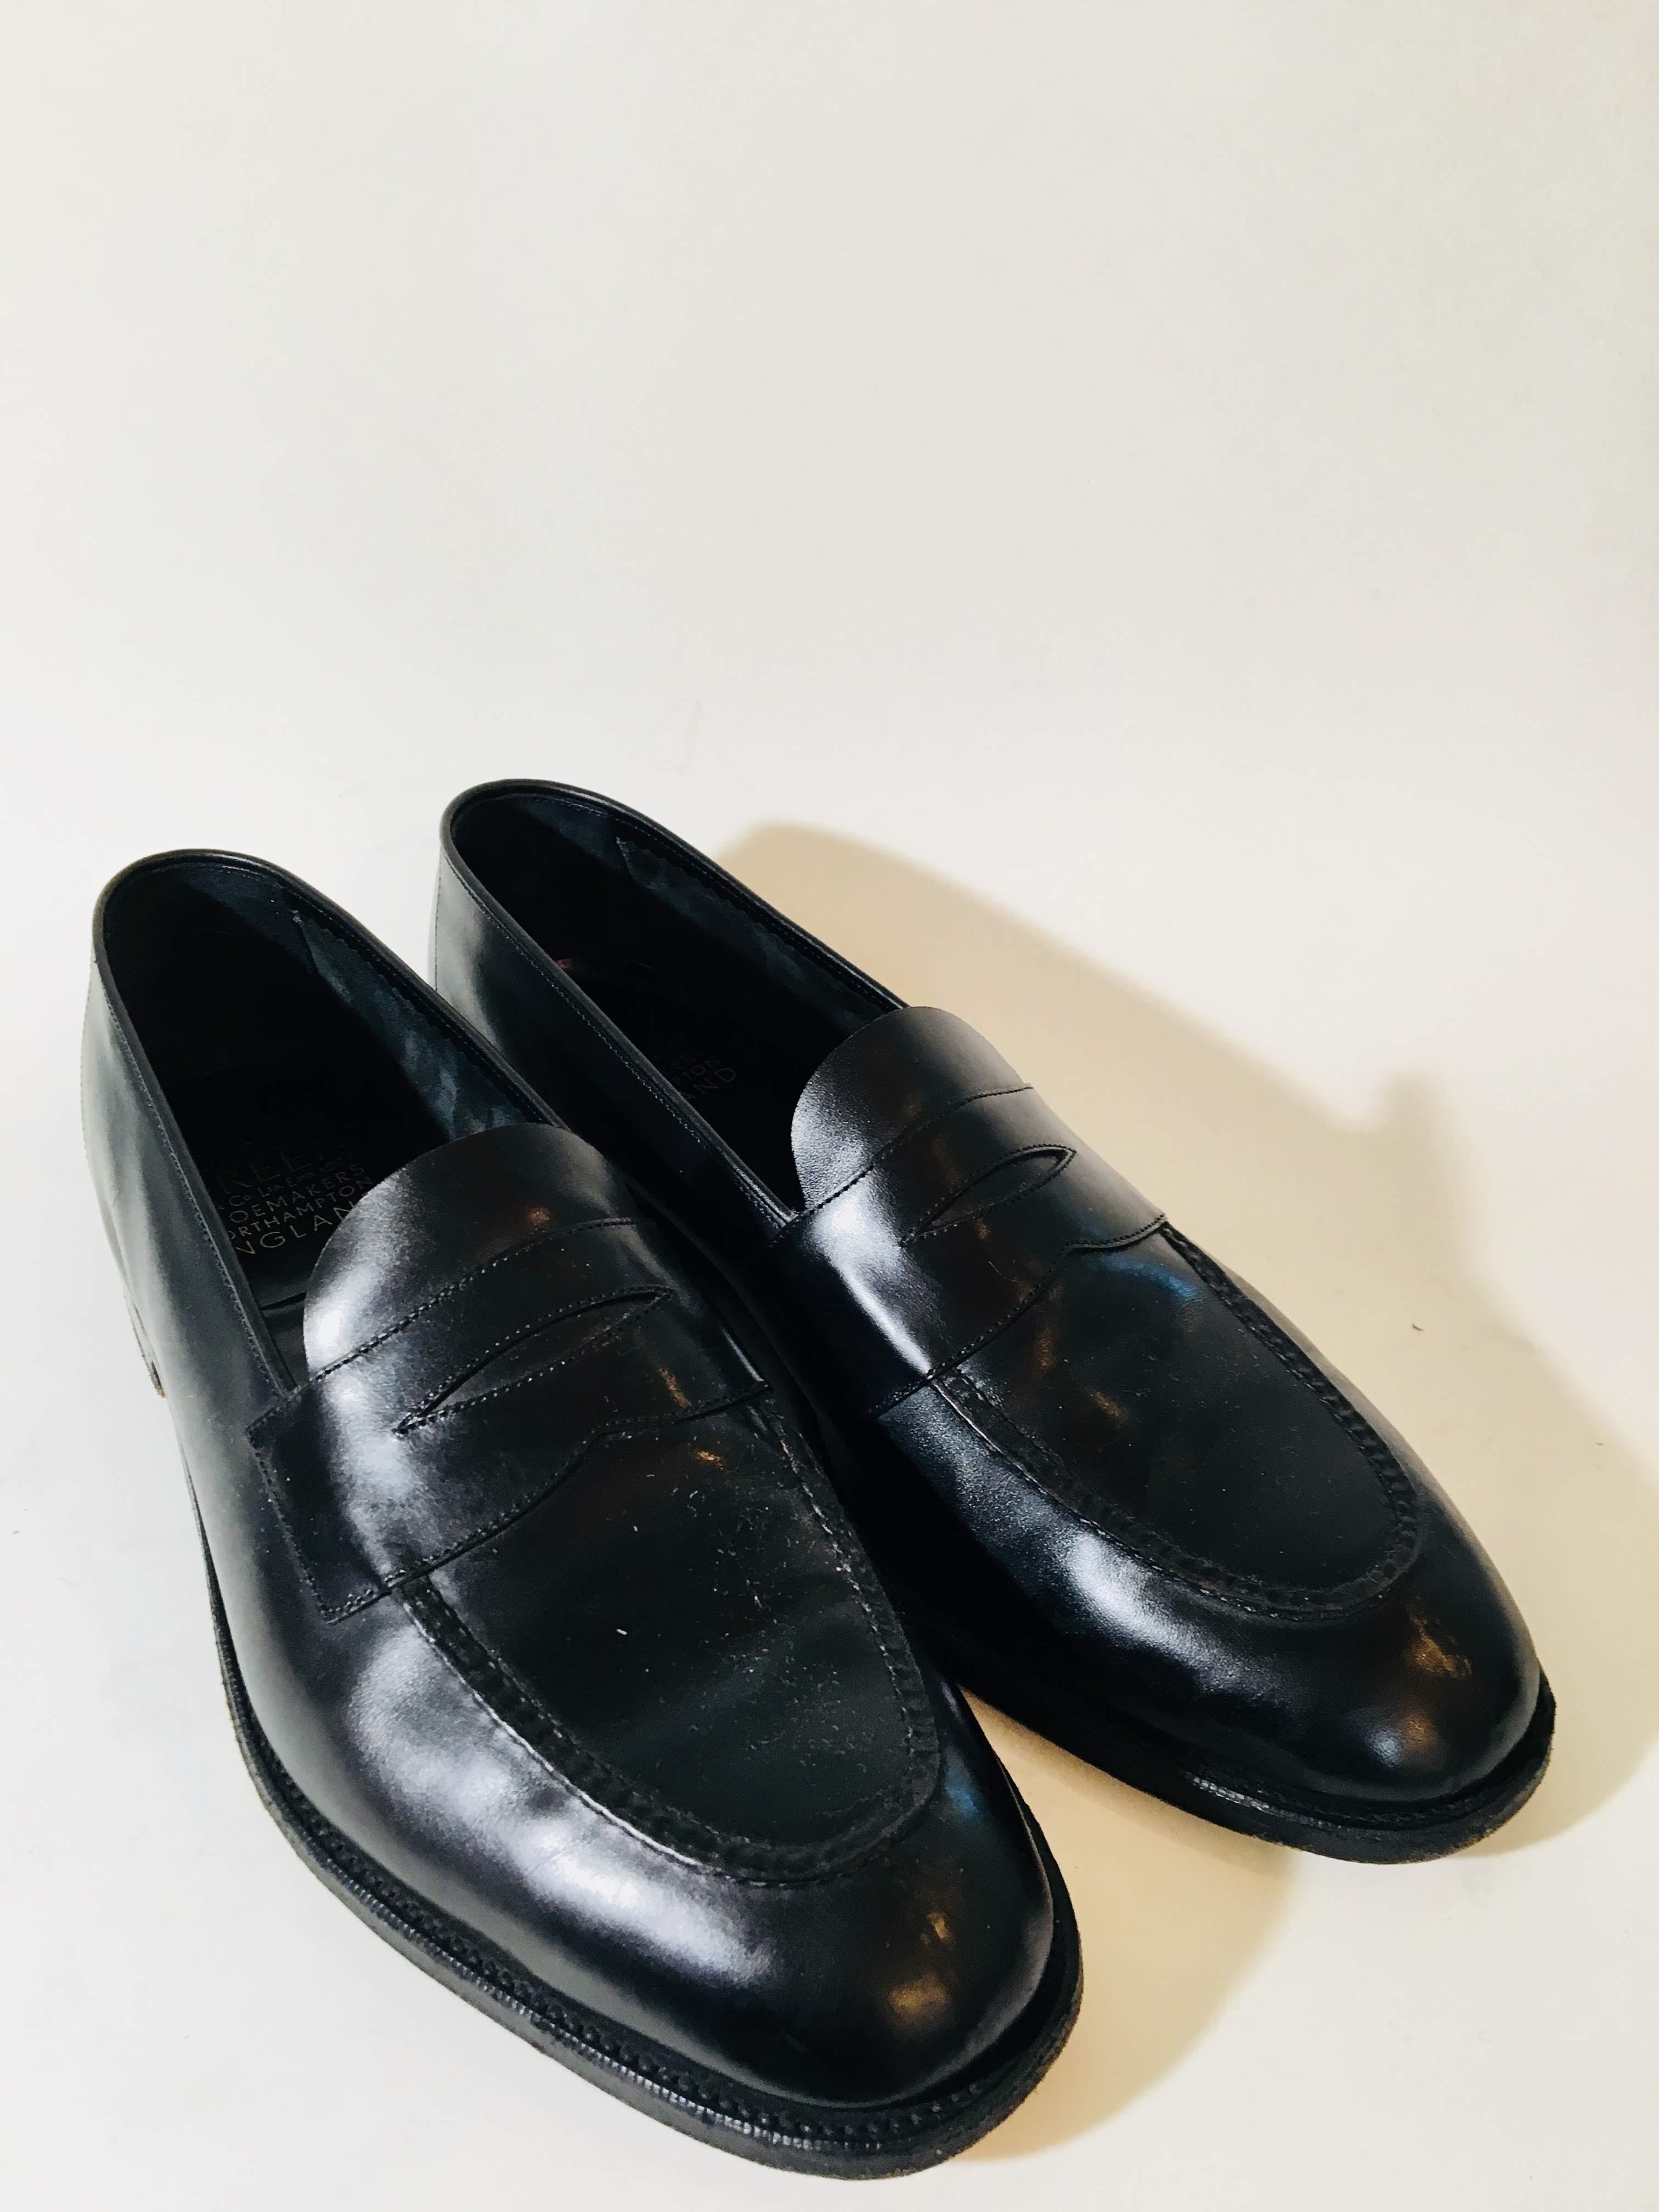 Edward Green Black Leather Penny Loafers with Semi-Round Toe. Made in England- Mens size 9.5